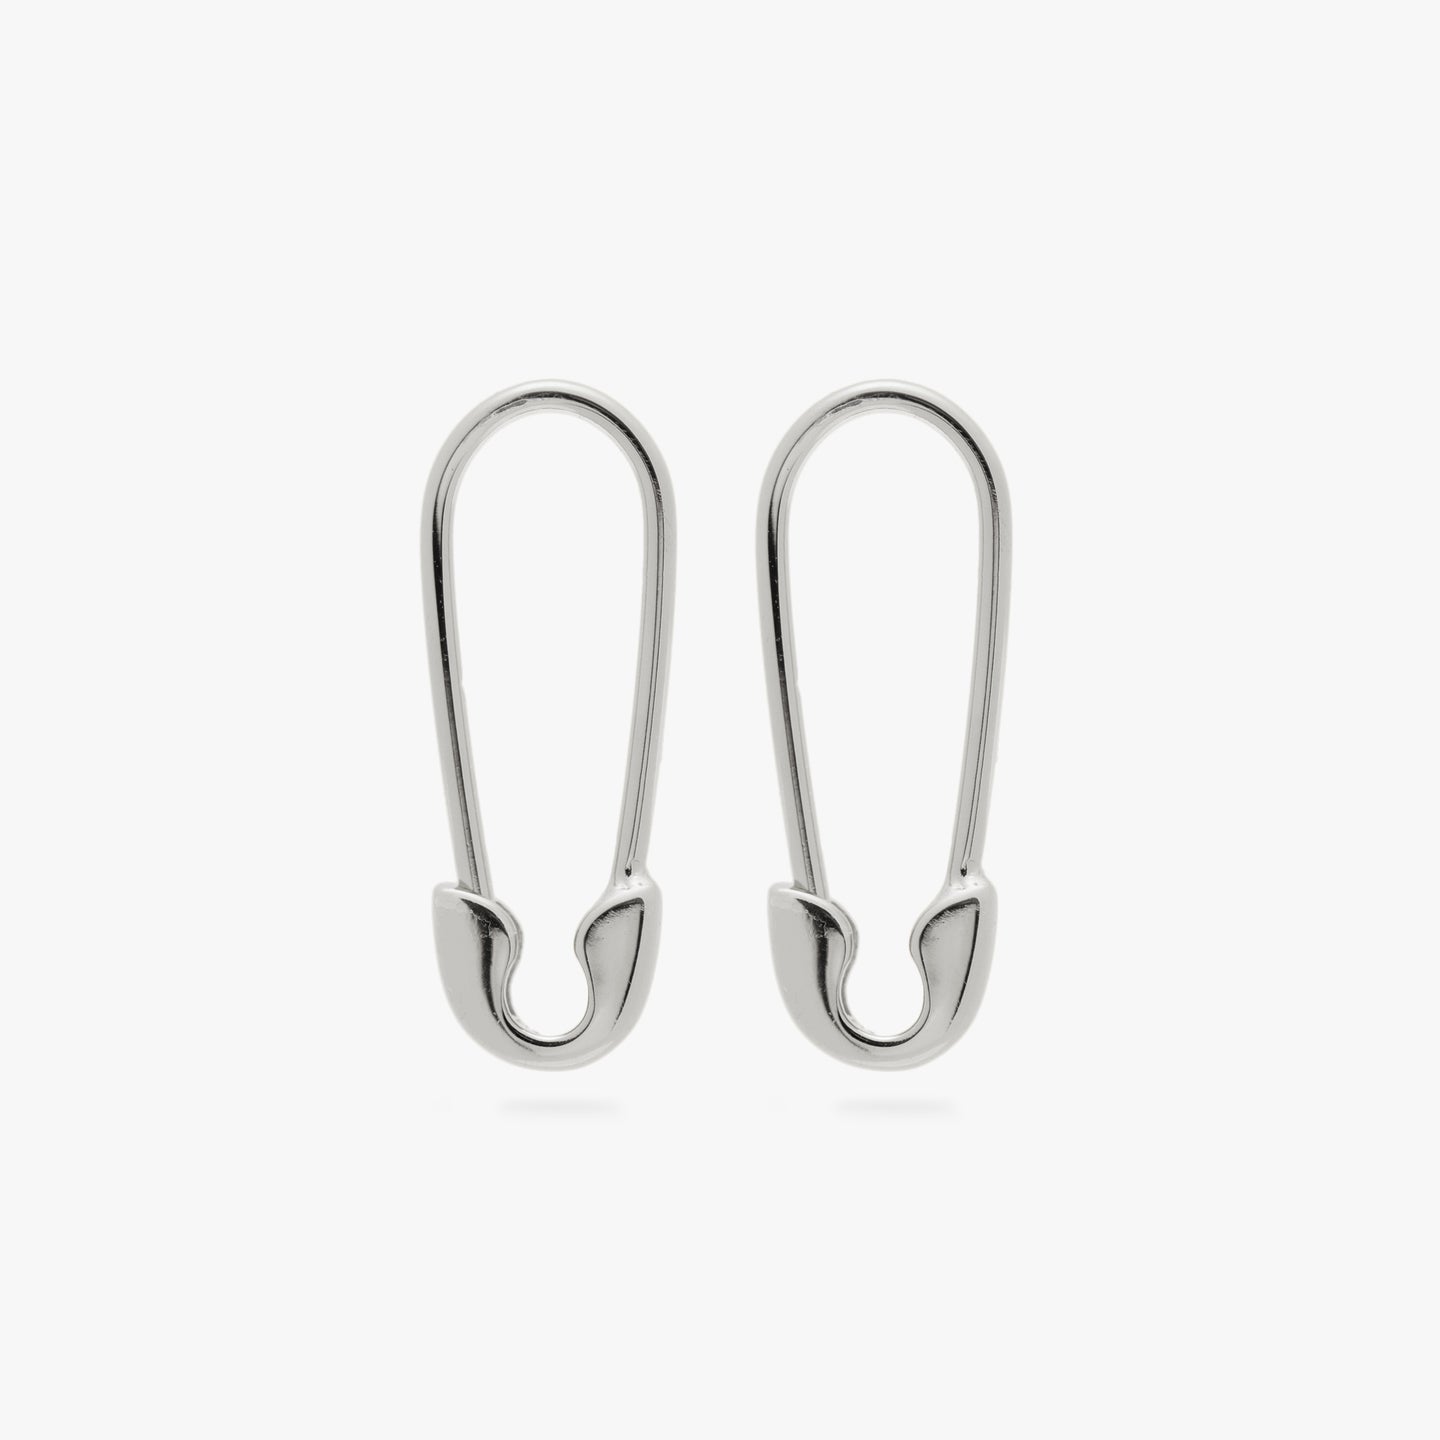 A pair of silver safety pin shaped earrings [pair] color:null|silver